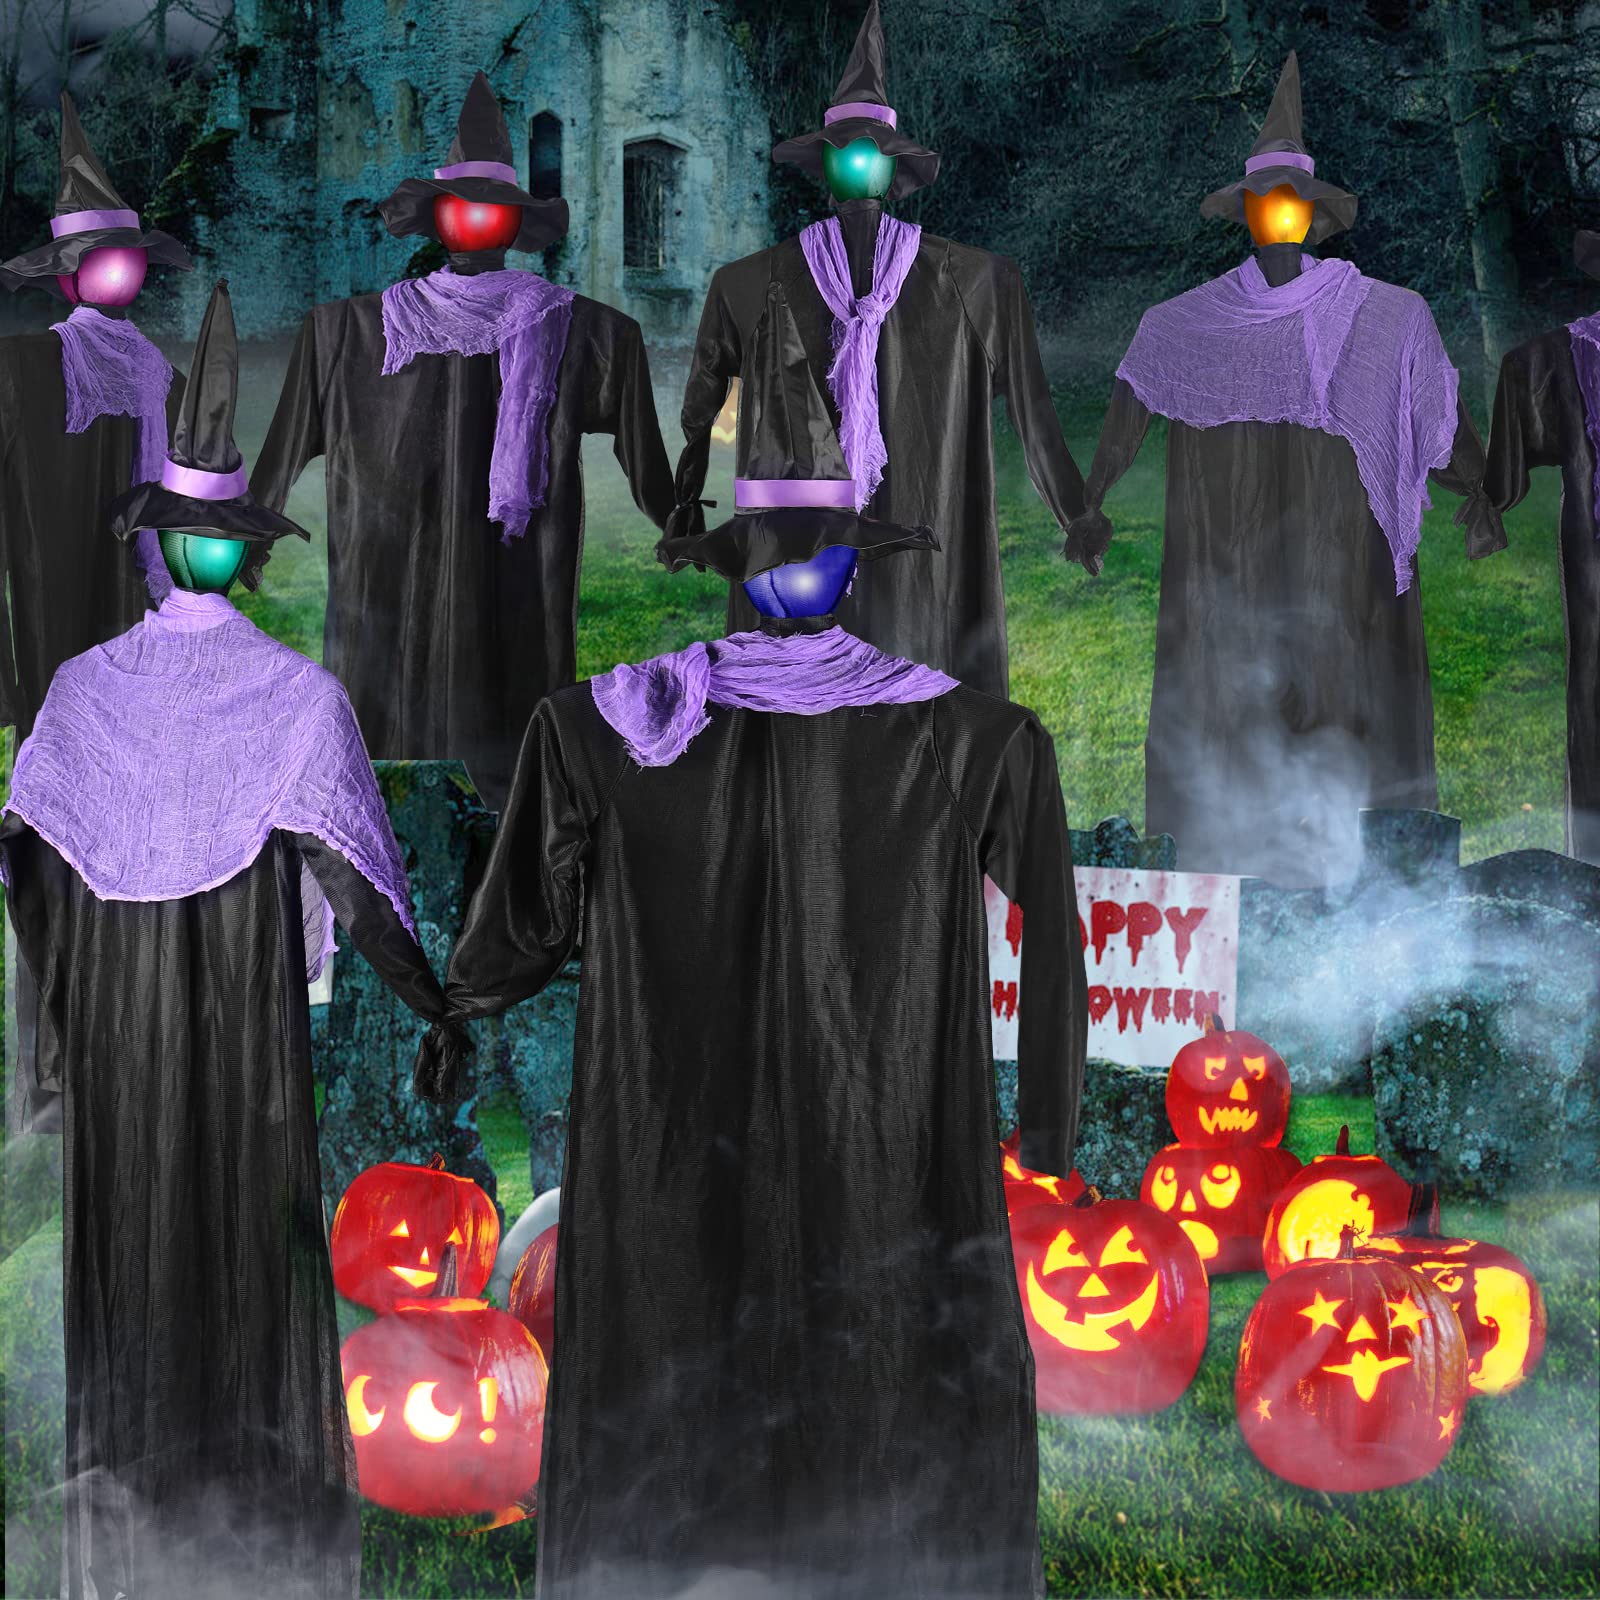 Halloween Decorations Outdoor, 3 Pack 6FT Holding Hands Halloween Witches with Stakes and Color Changing LED Lights, Scary Screaming Voice Control Witch for Outdoor Lawn Yard Home Party Decoration